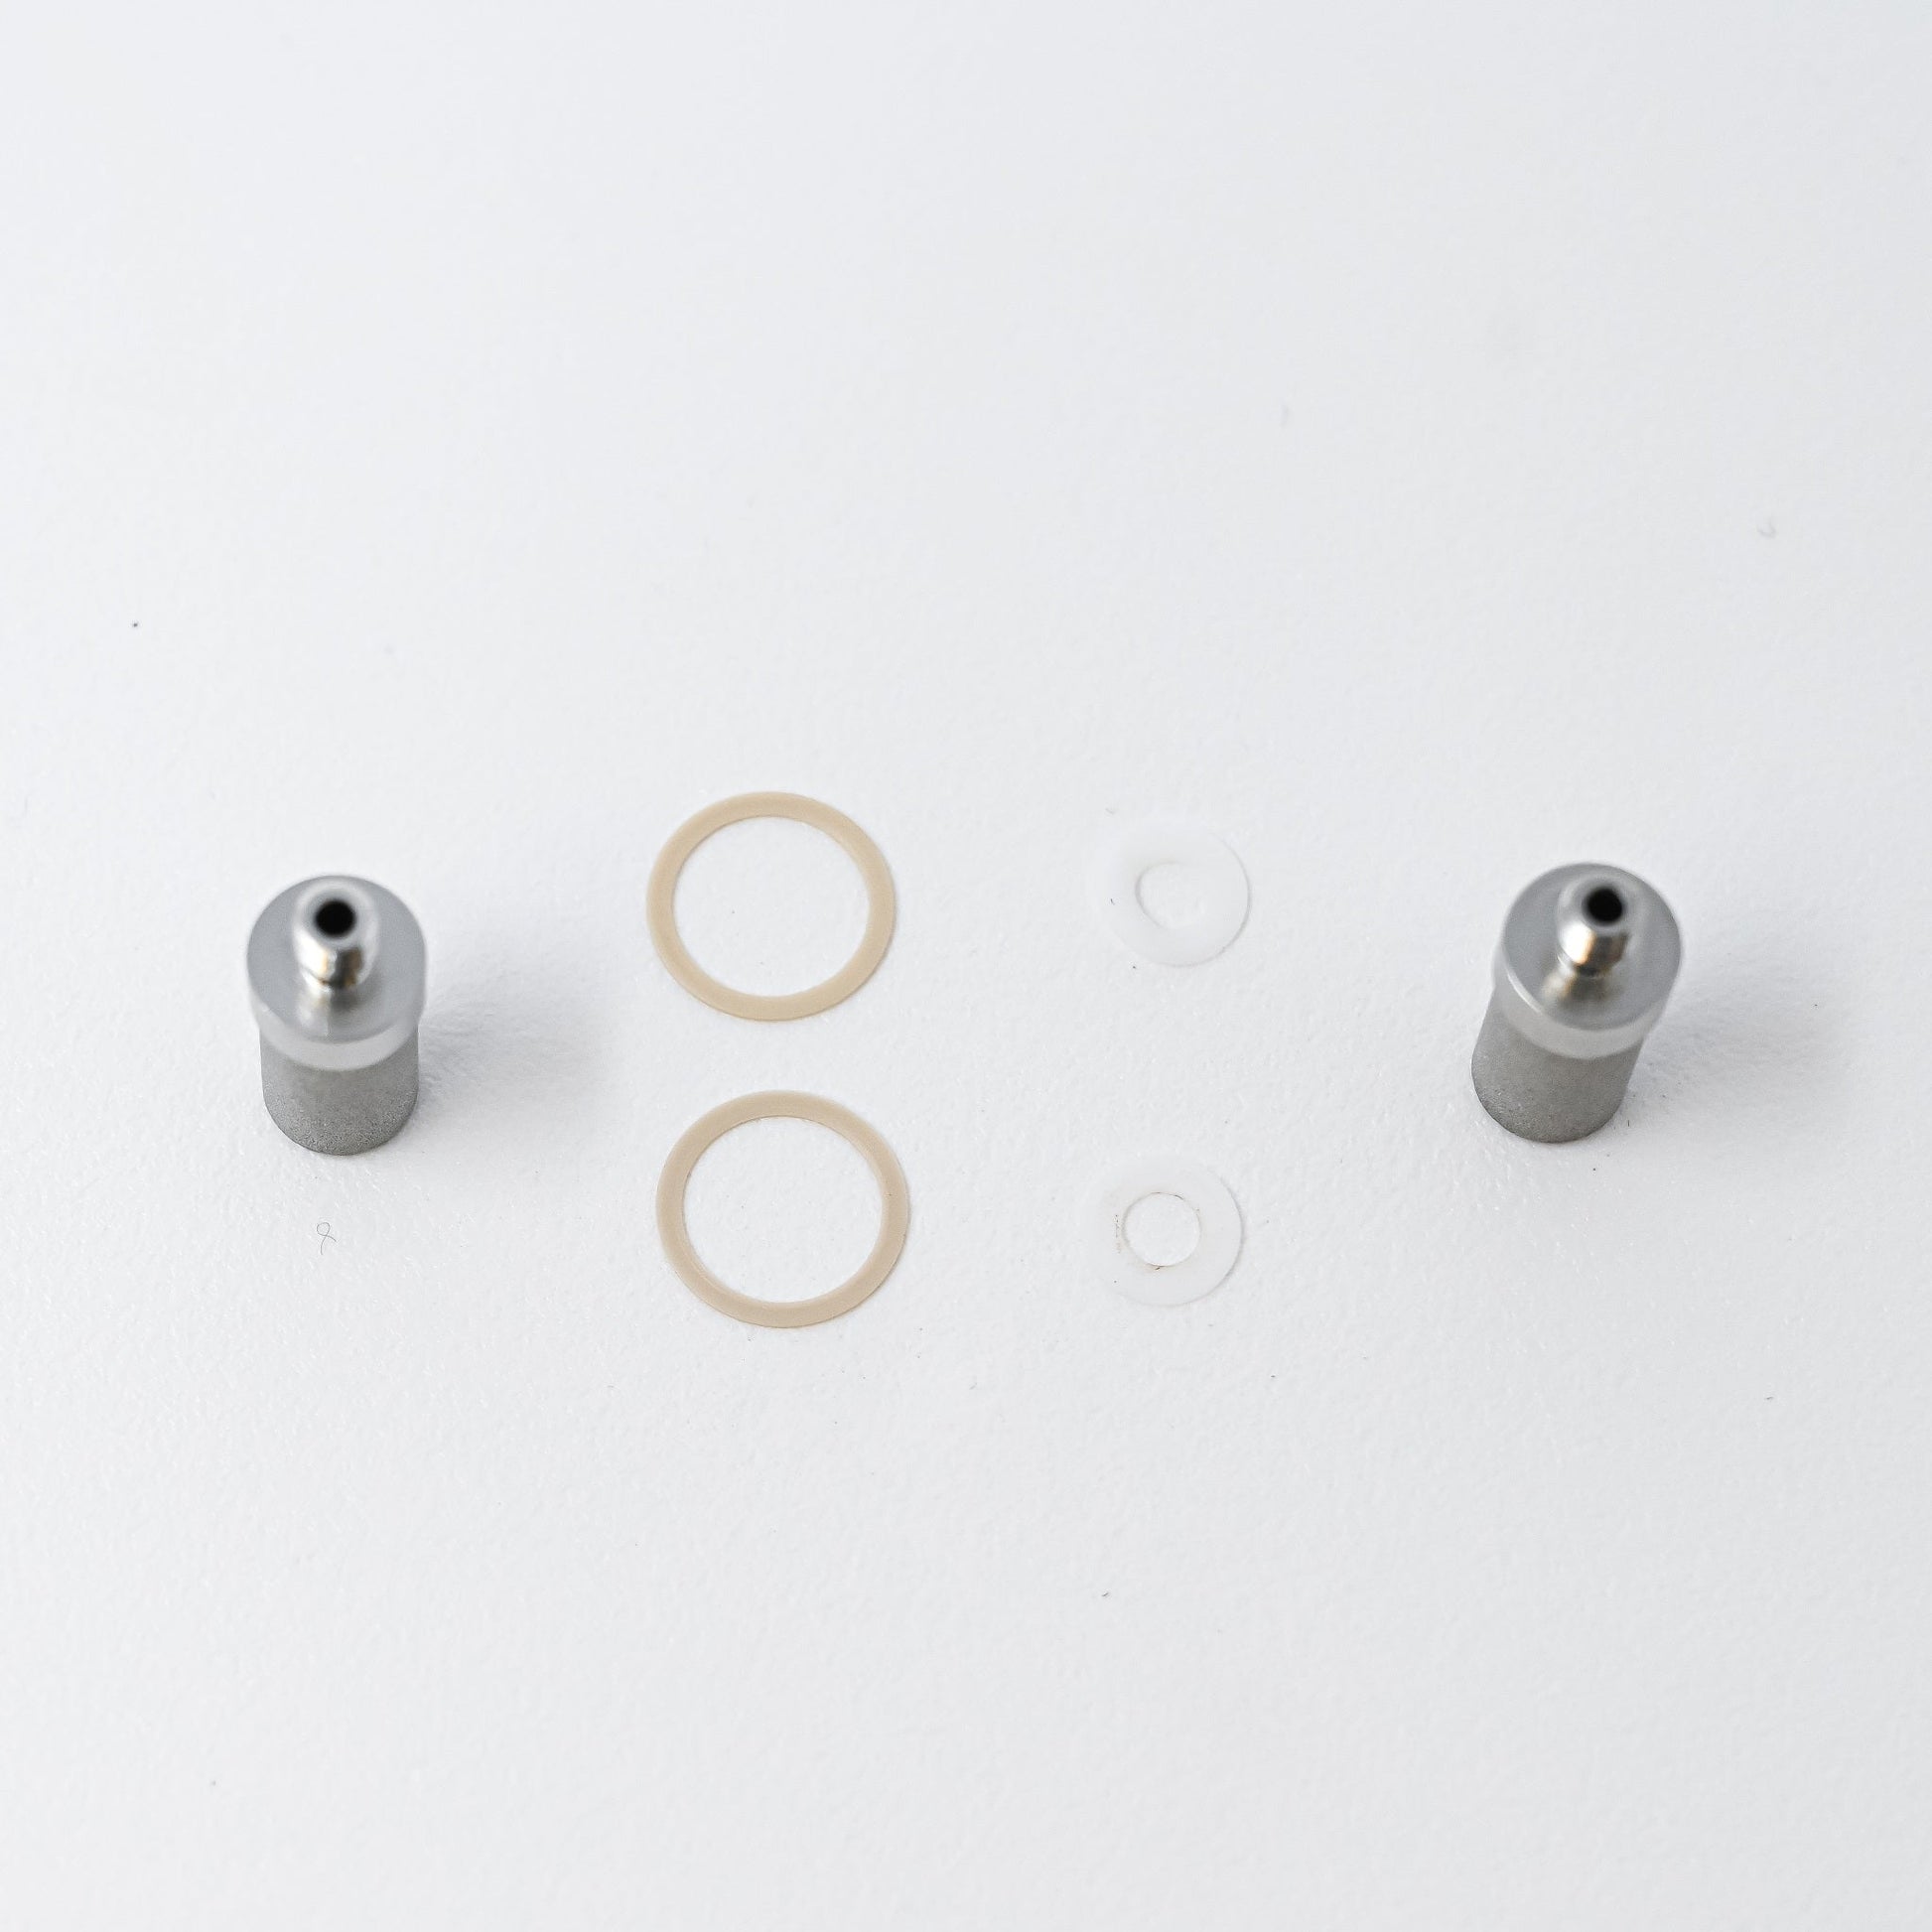 Cylindrical filter elements with o-rings and gaskets.